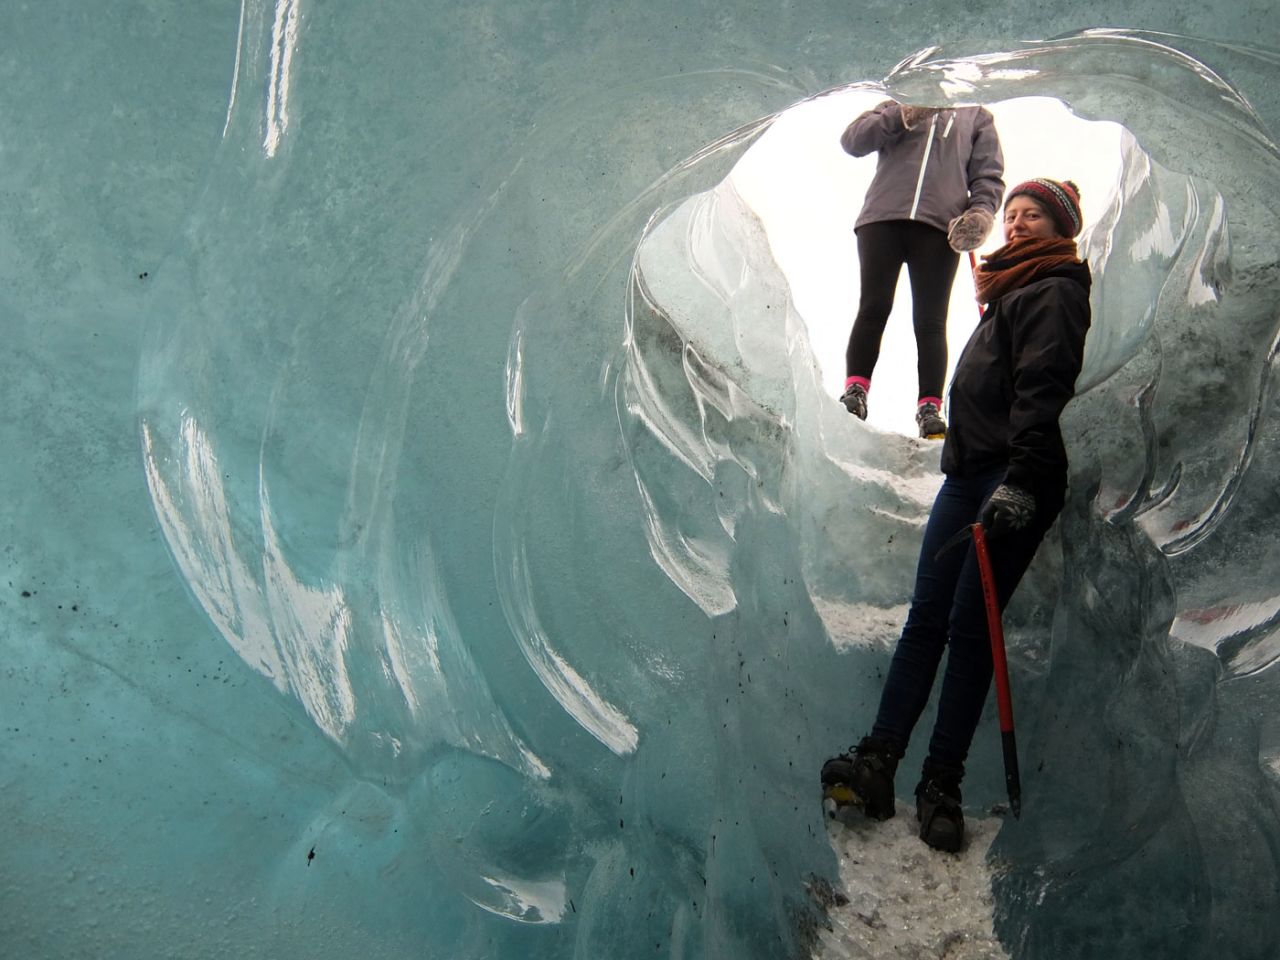 Melting ice can create holes, known as moulins, that plunge down through the glacier. Some are big enough to climb through.